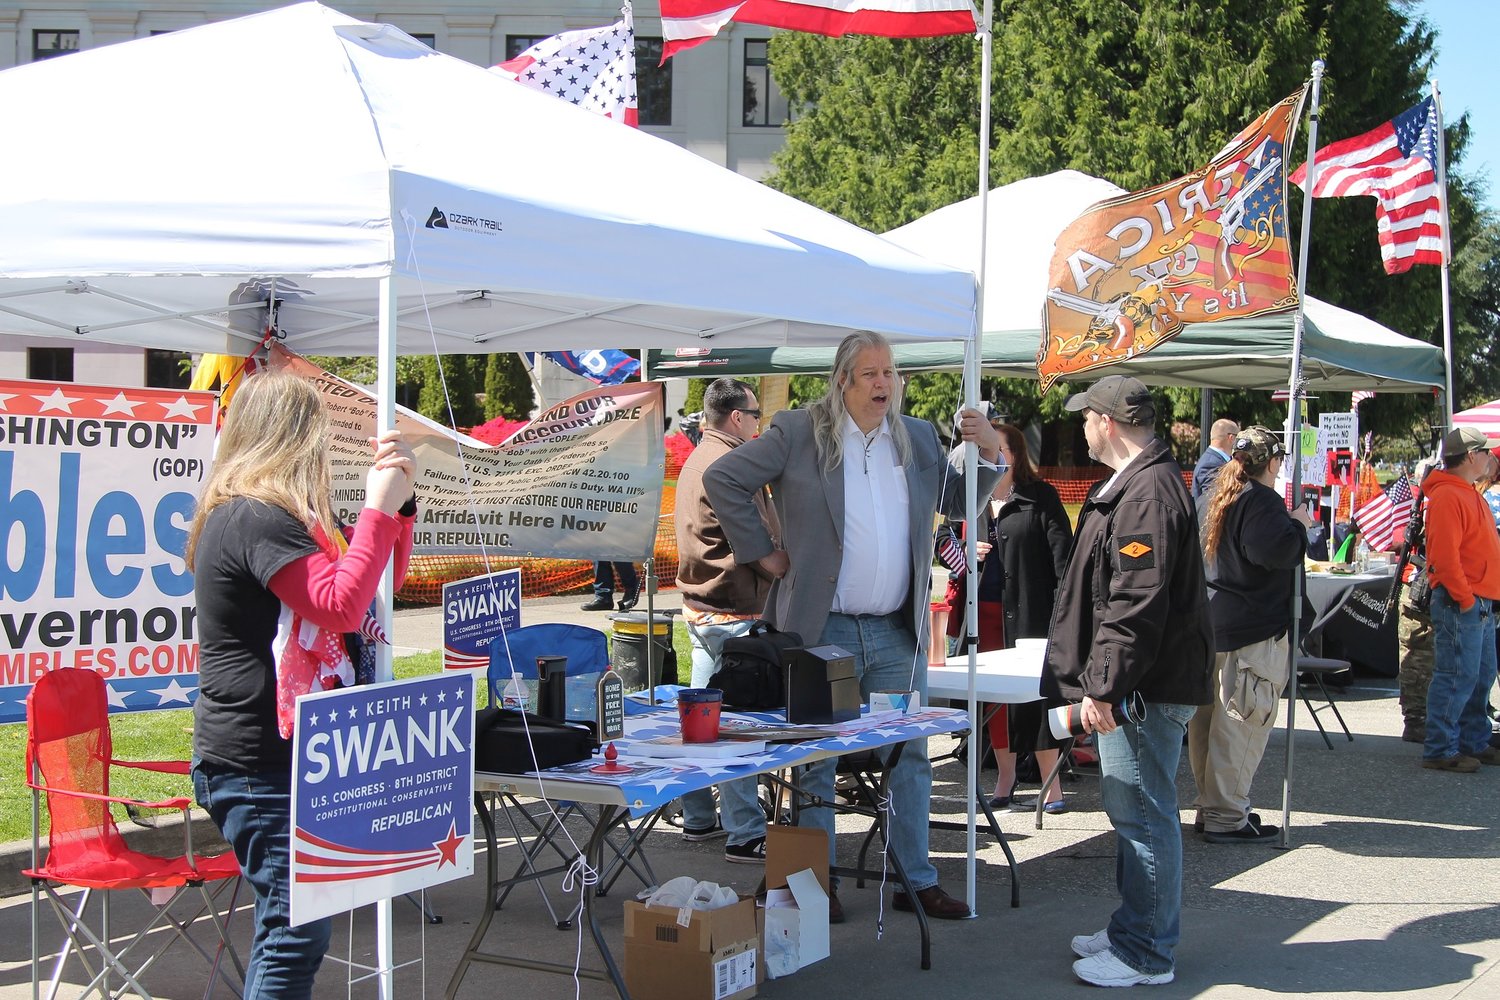 Supporters man the Keith Swank for U.S. Congress booth at the “March for Our Rights” rally in Olympia on April 27.